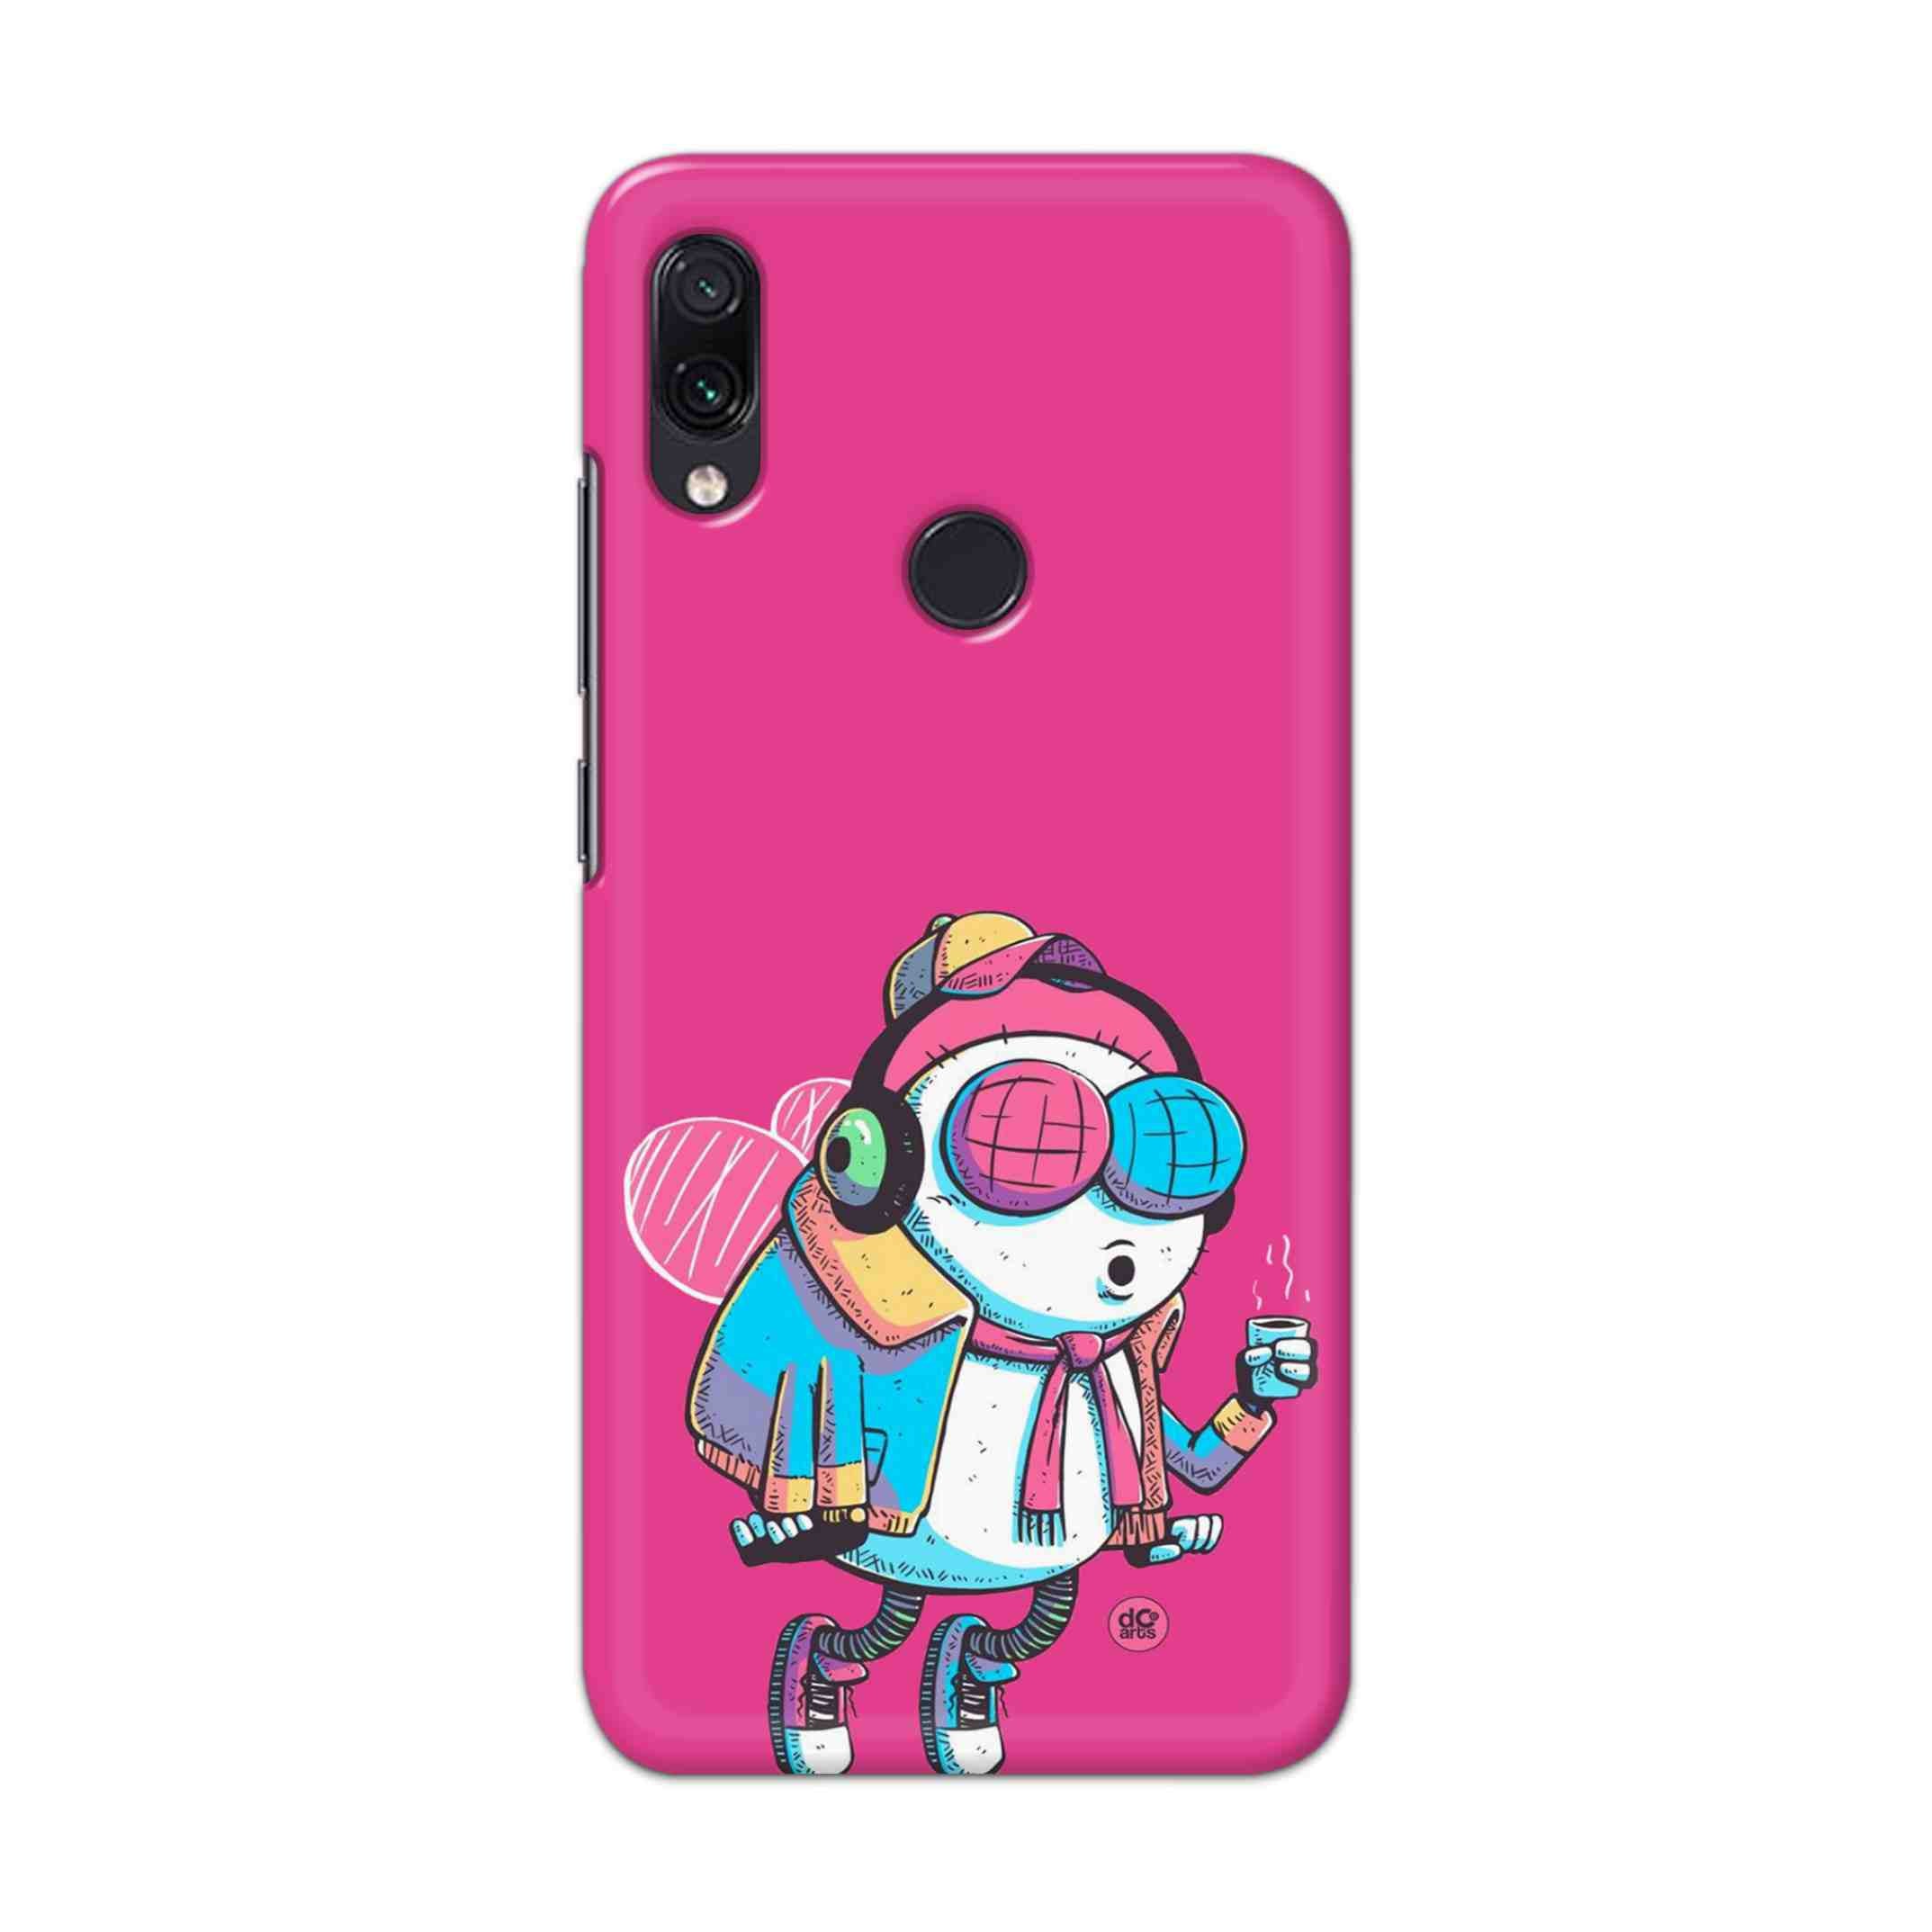 Buy Sky Fly Hard Back Mobile Phone Case Cover For Xiaomi Redmi 7 Online